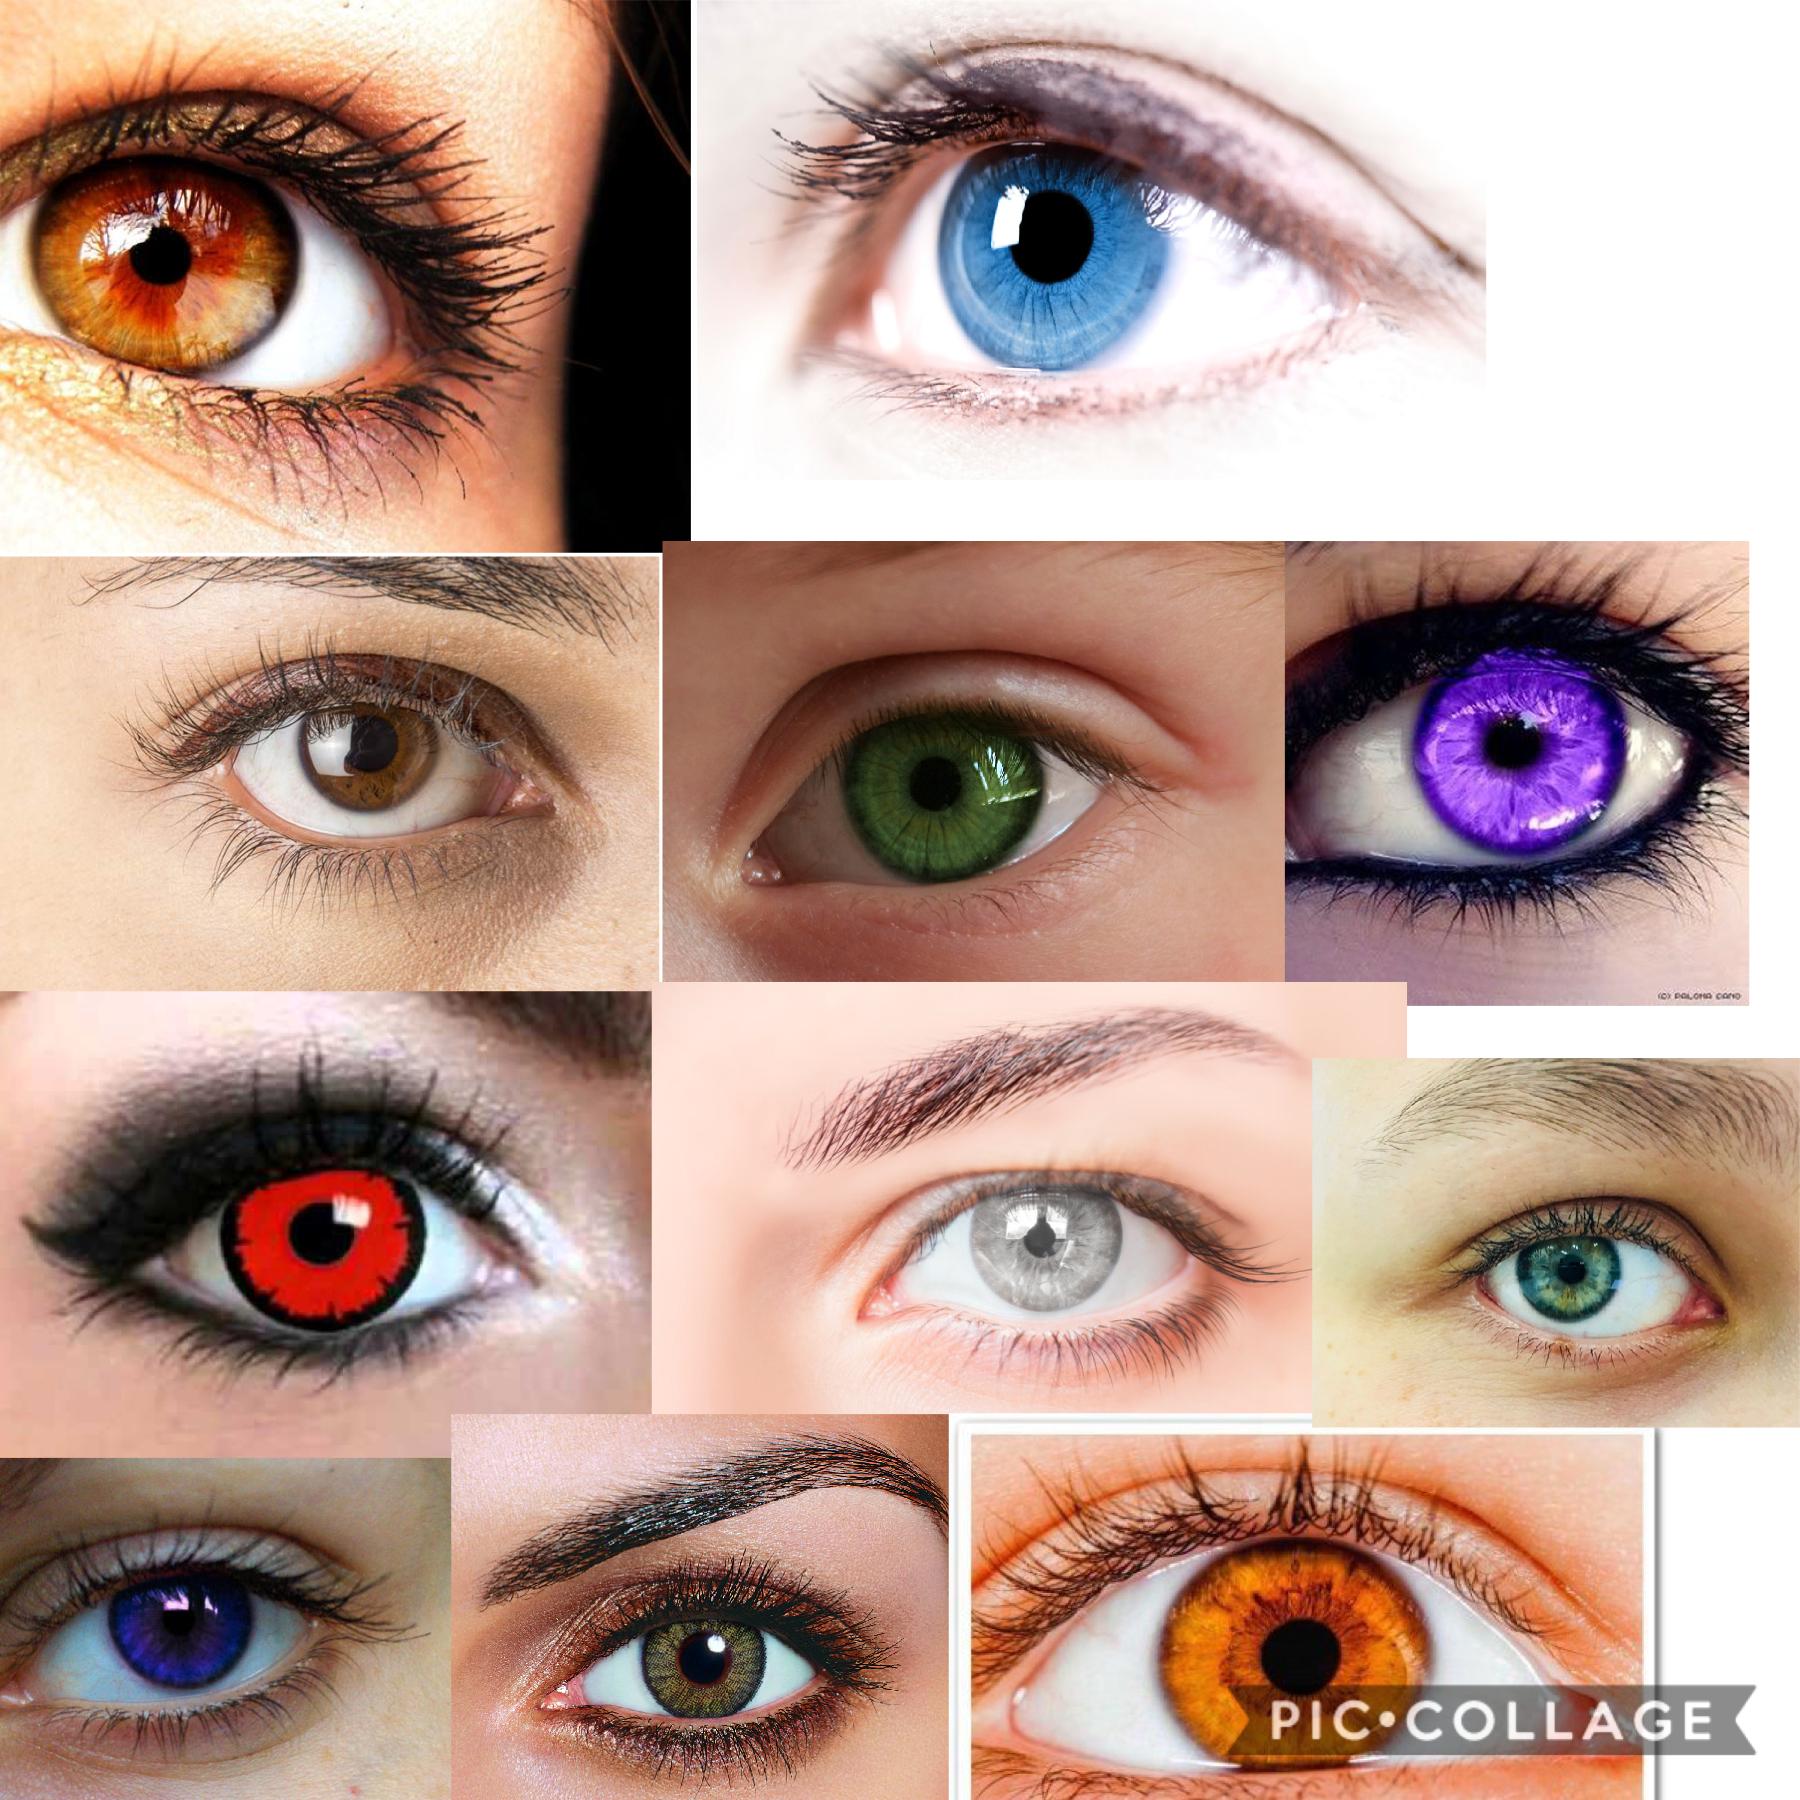 👁Tap👁
Comment Below What Color Your Eyes Are! 